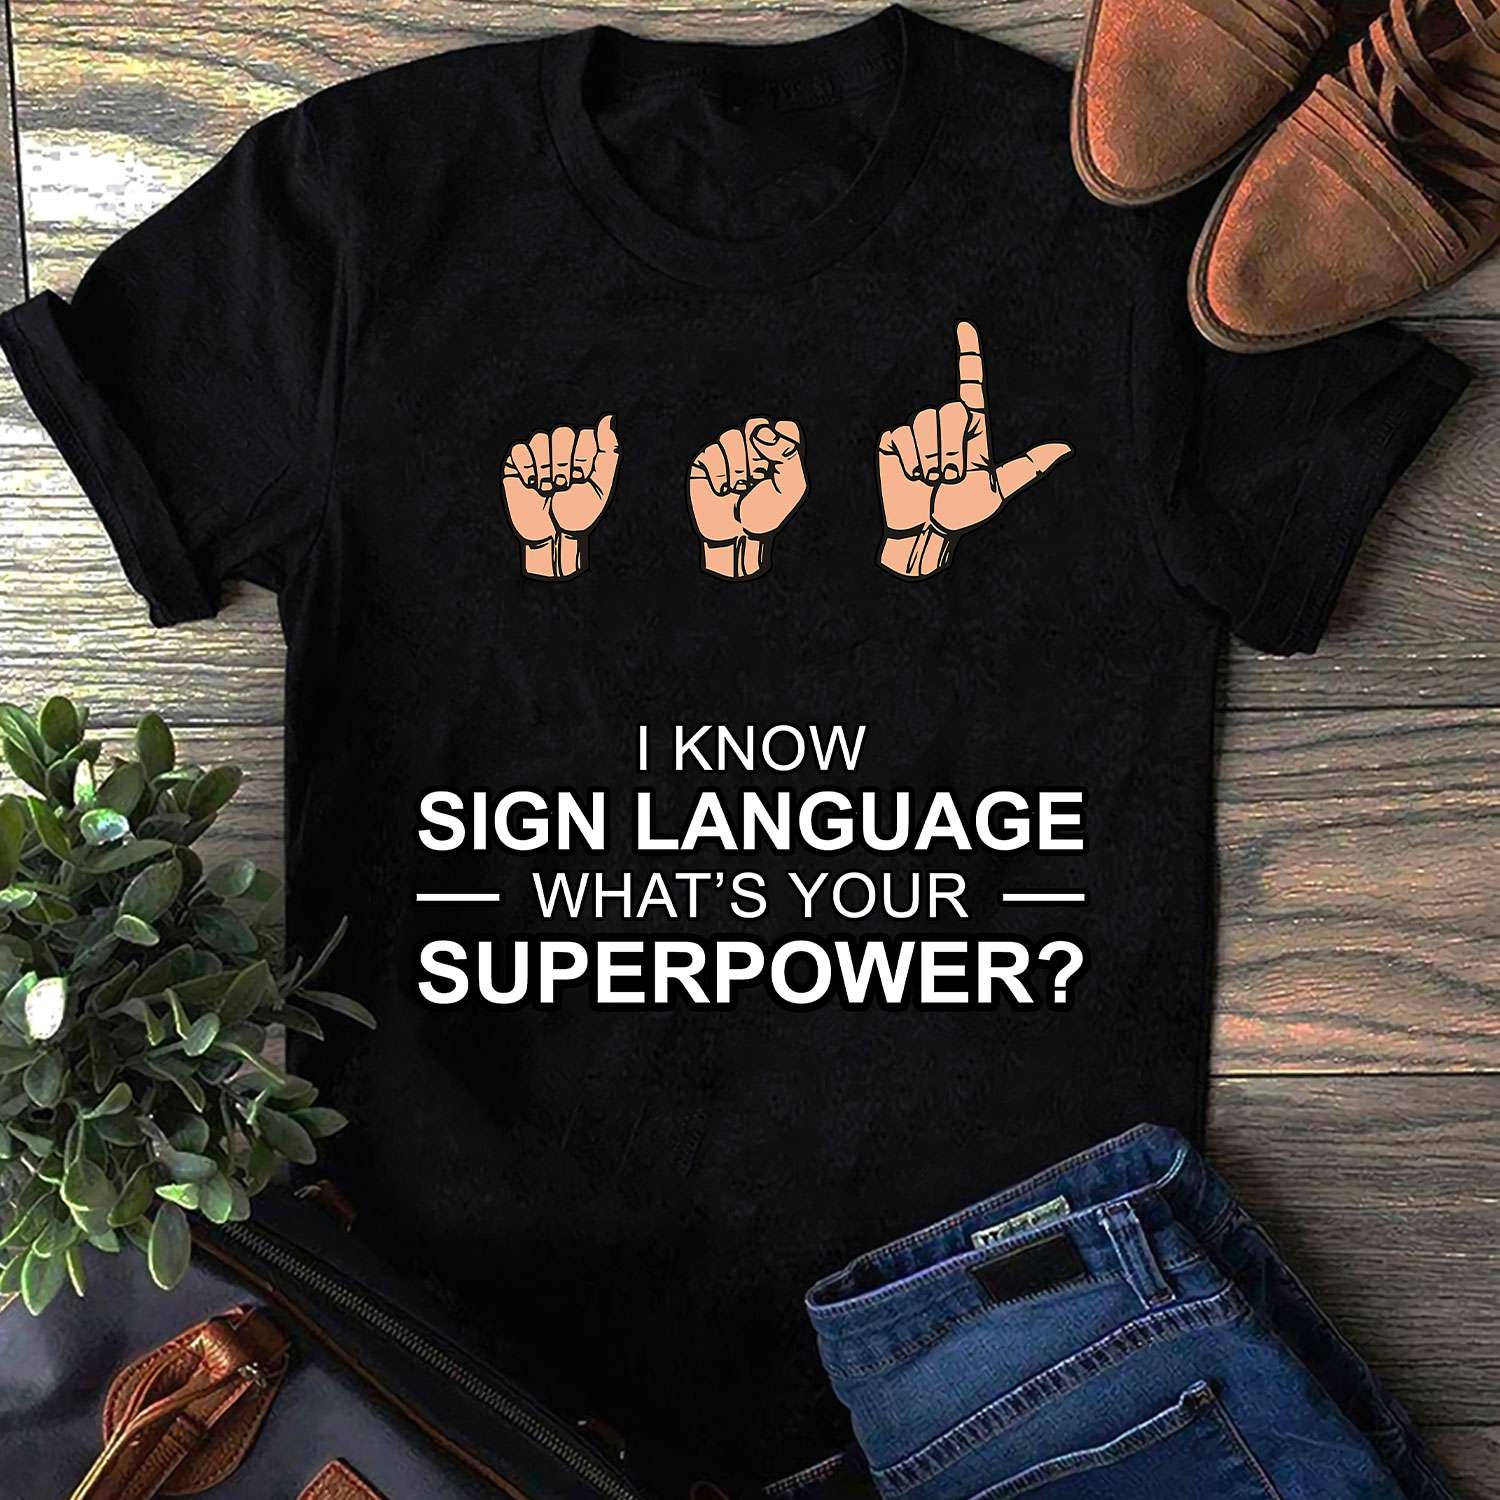 I know sign language what's your superpower - Sign language superpower, deaf people T-shirt